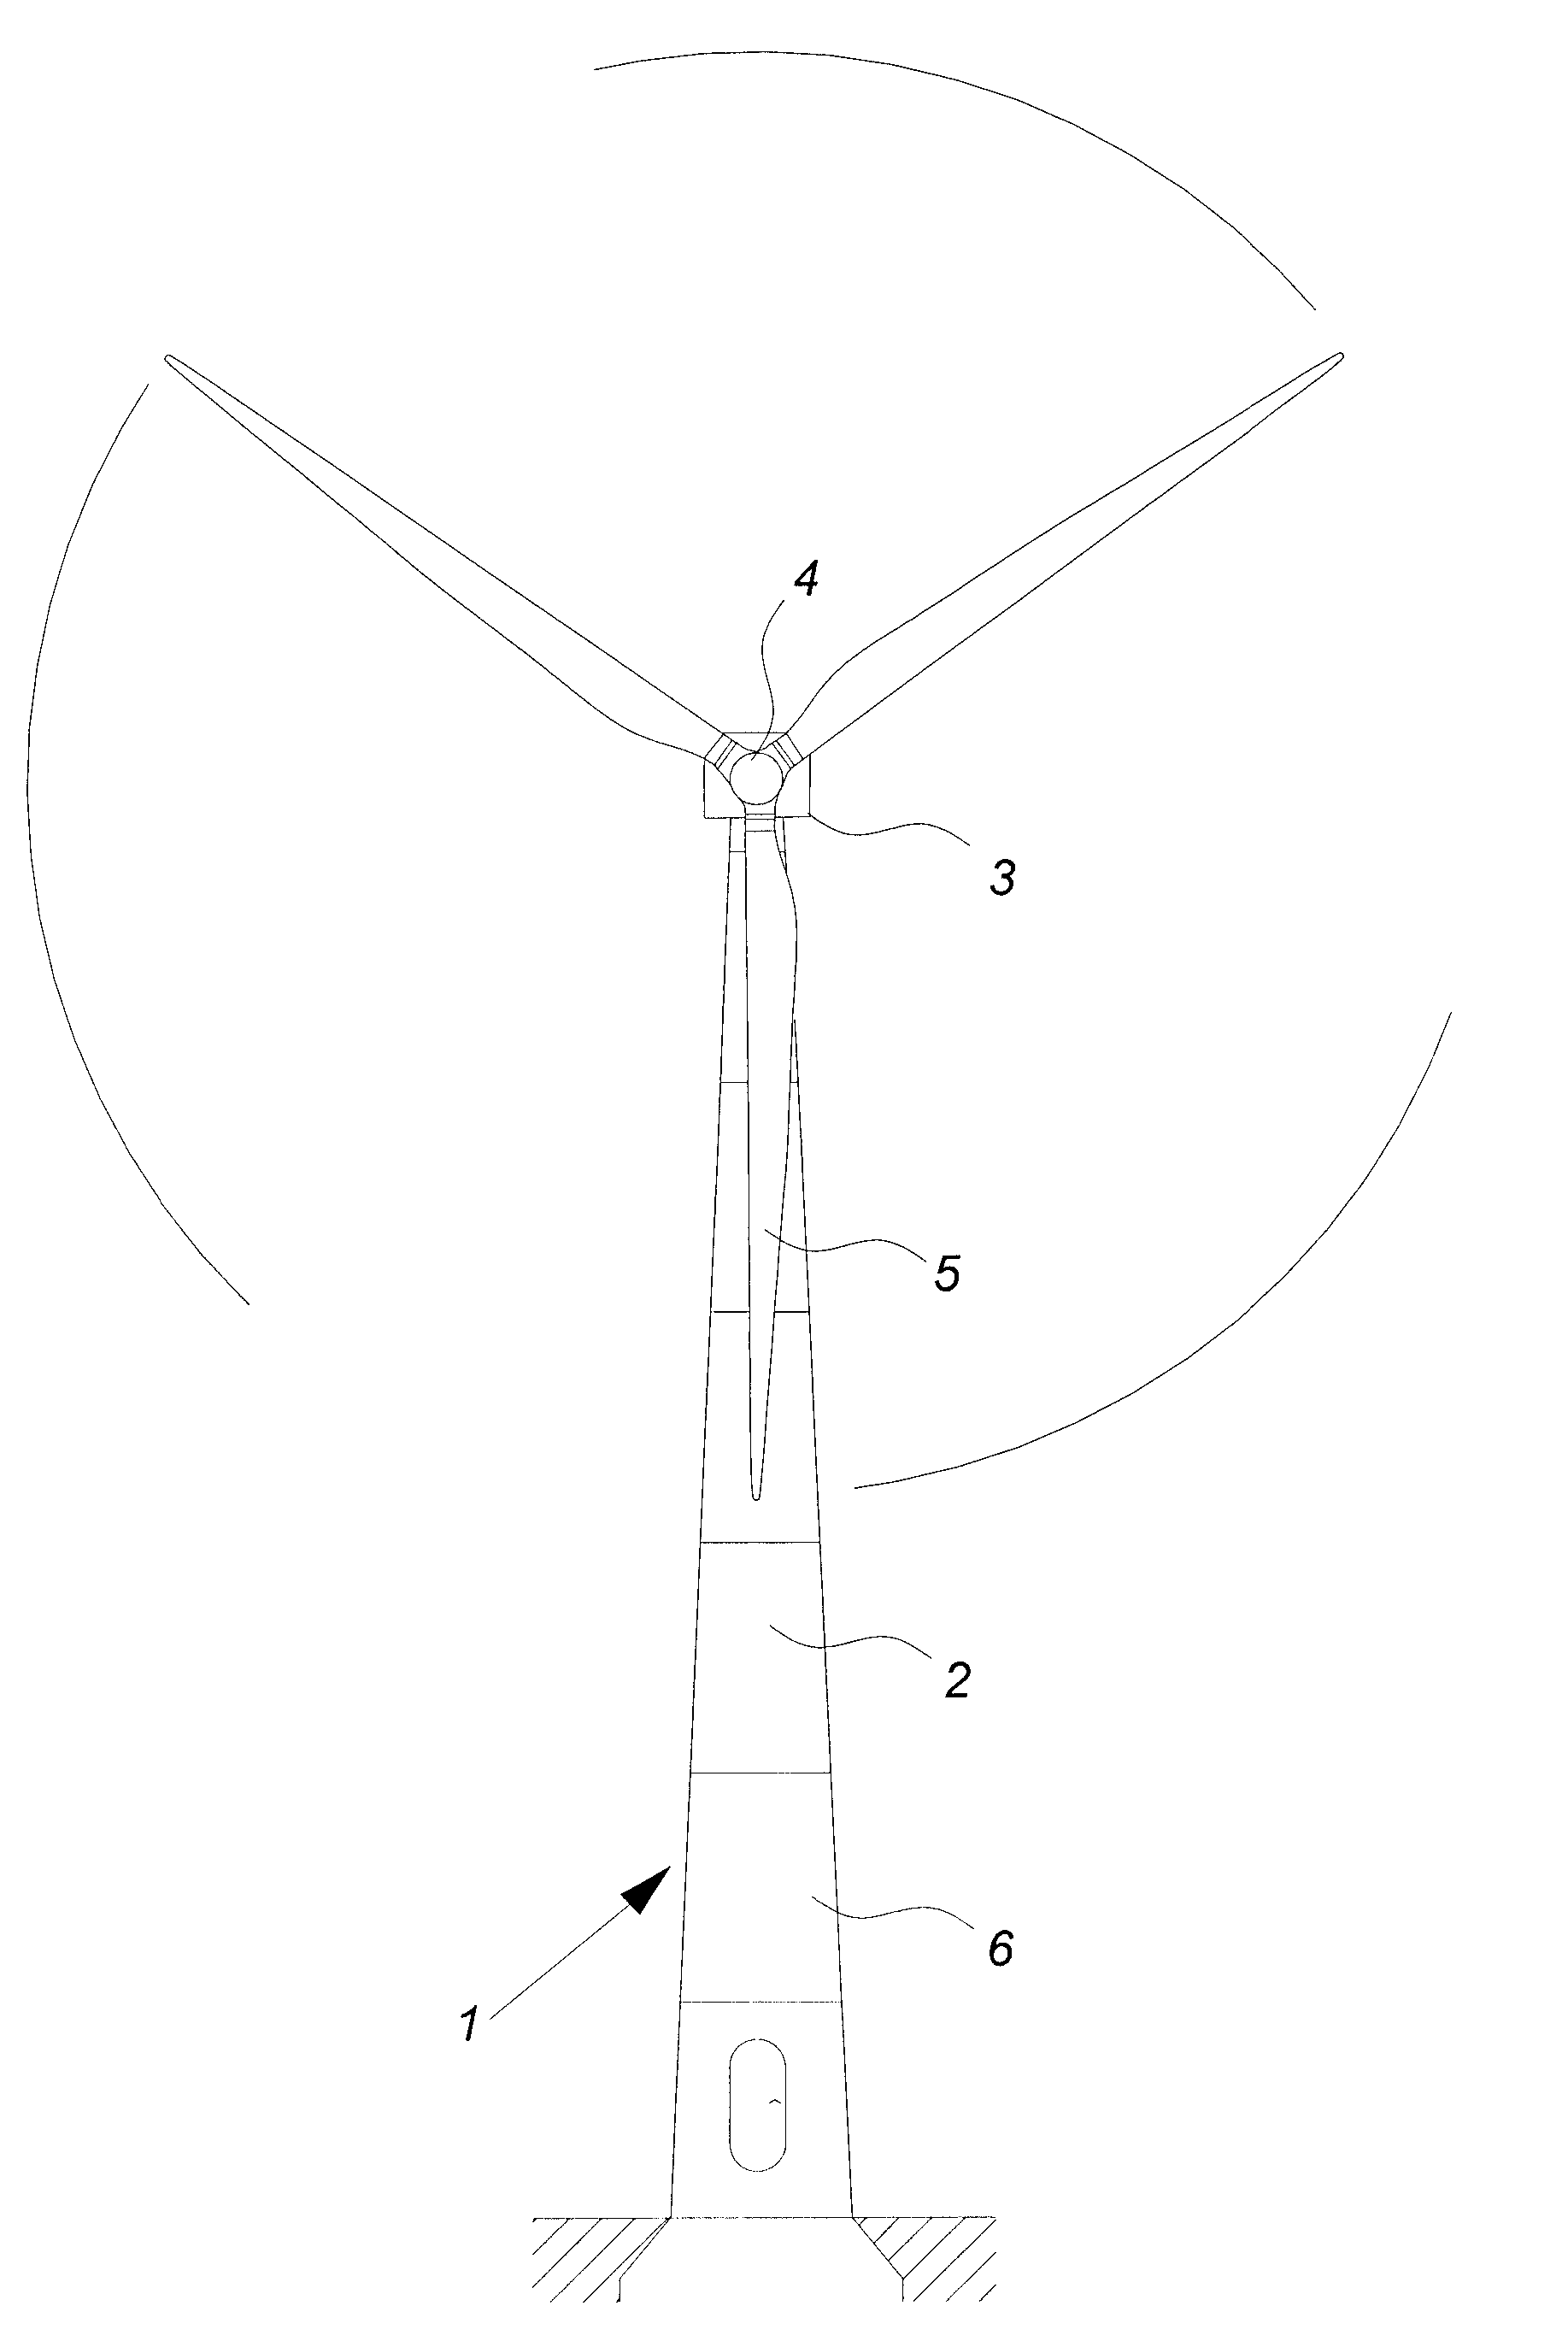 Wind Turbine Tower, A Wind Turbine And A Method For Assembling A Wind Turbine Tower